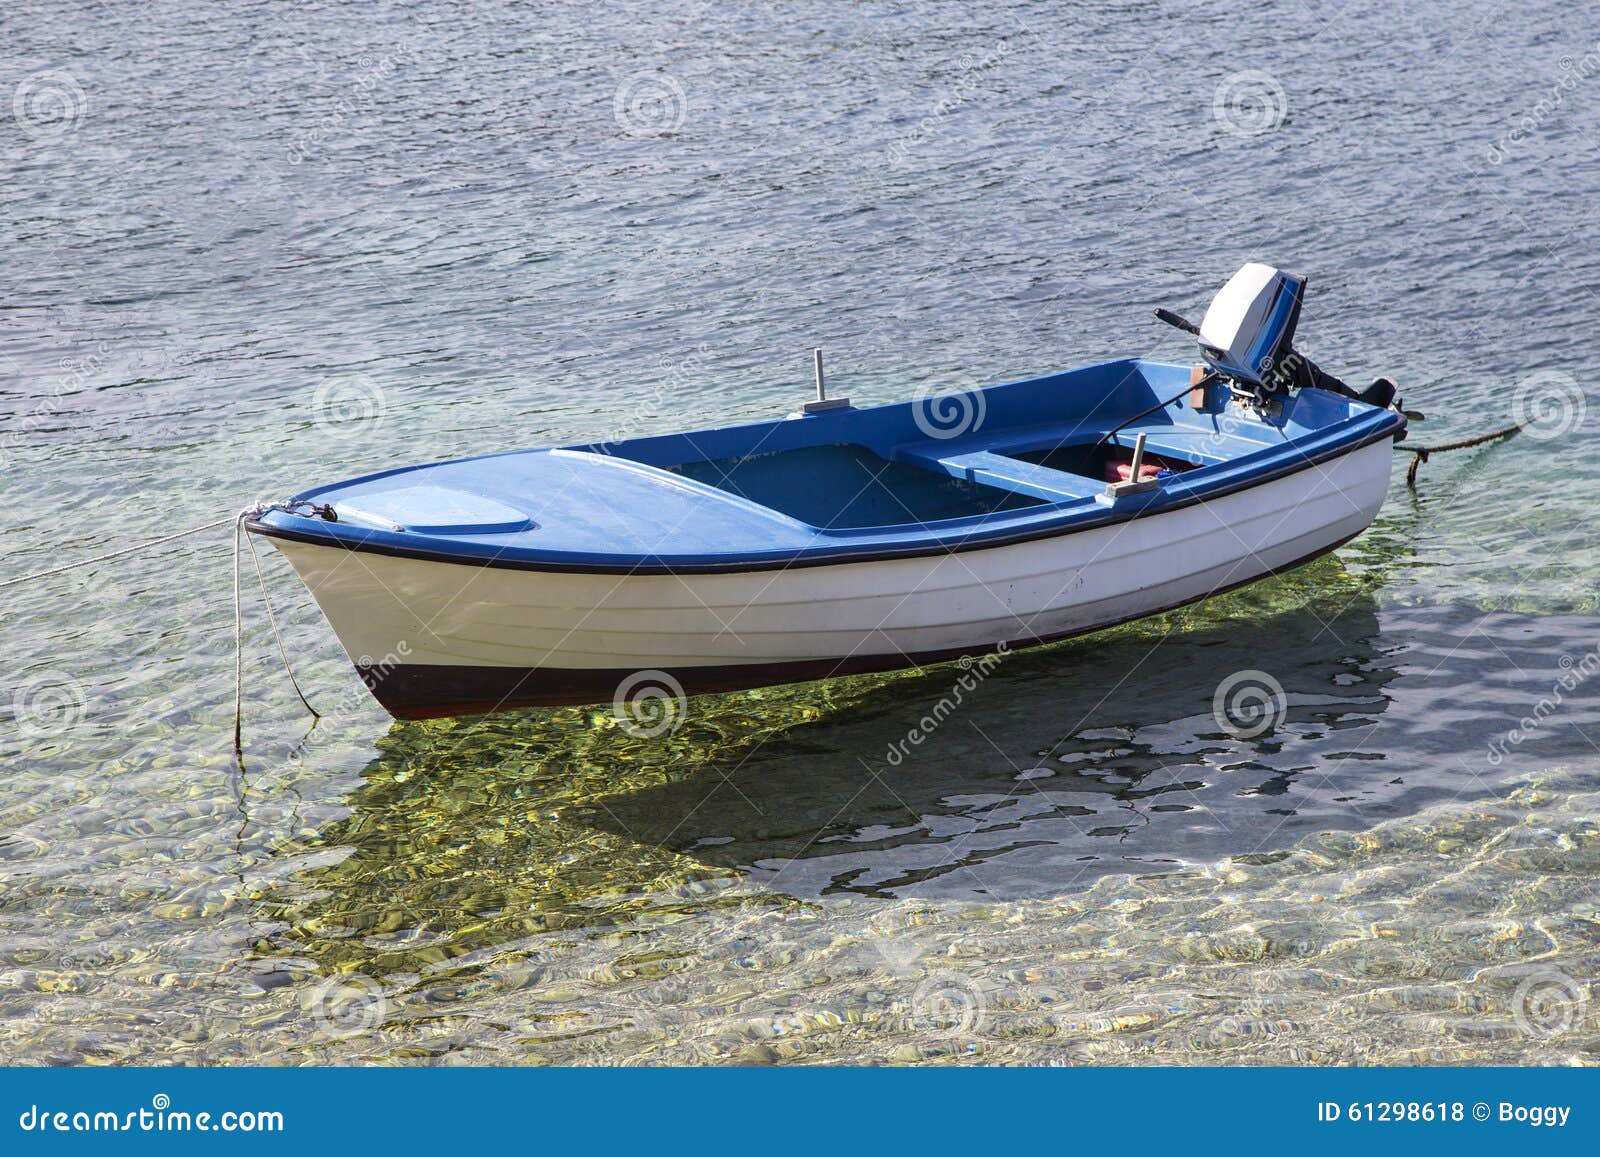 https://thumbs.dreamstime.com/z/small-fishing-boat-sea-summer-day-view-61298618.jpg